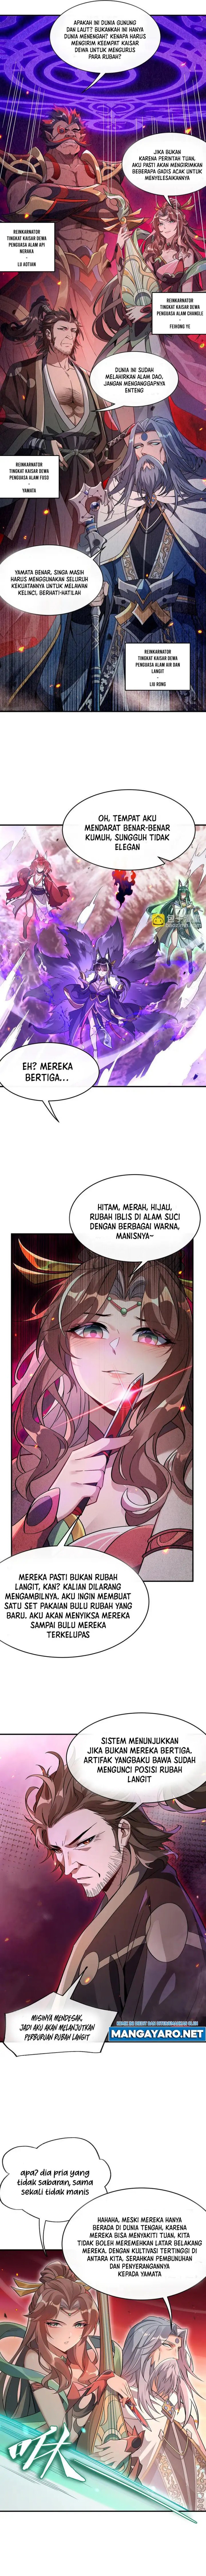 Dilarang COPAS - situs resmi www.mangacanblog.com - Komik my female apprentices are all big shots from the future 224 - chapter 224 225 Indonesia my female apprentices are all big shots from the future 224 - chapter 224 Terbaru 6|Baca Manga Komik Indonesia|Mangacan